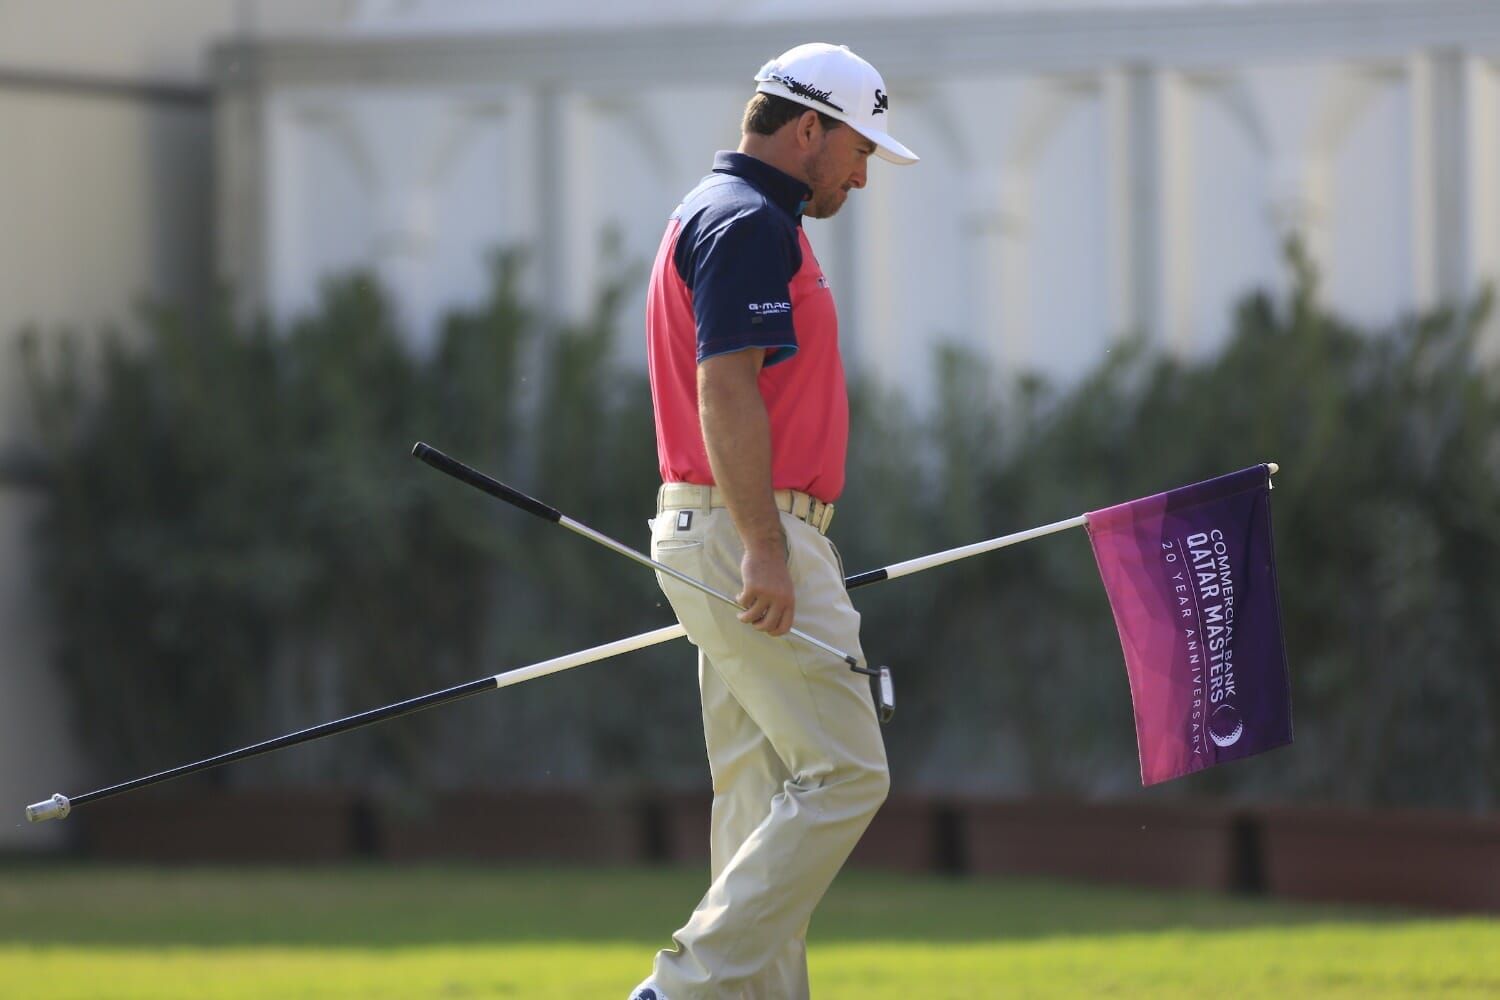 Hot start for Gmac in first round at Qatar Masters